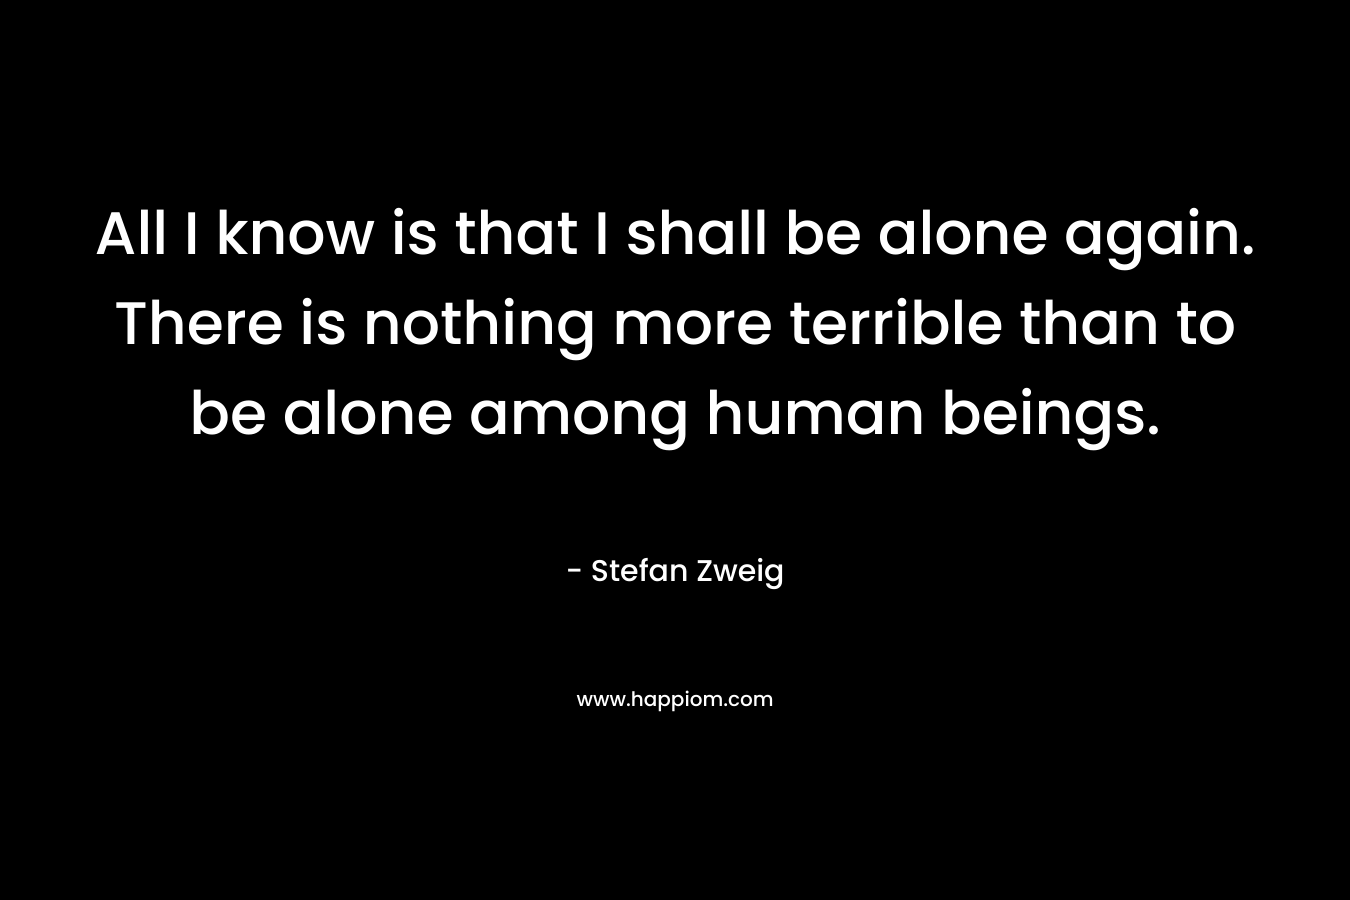 All I know is that I shall be alone again. There is nothing more terrible than to be alone among human beings.